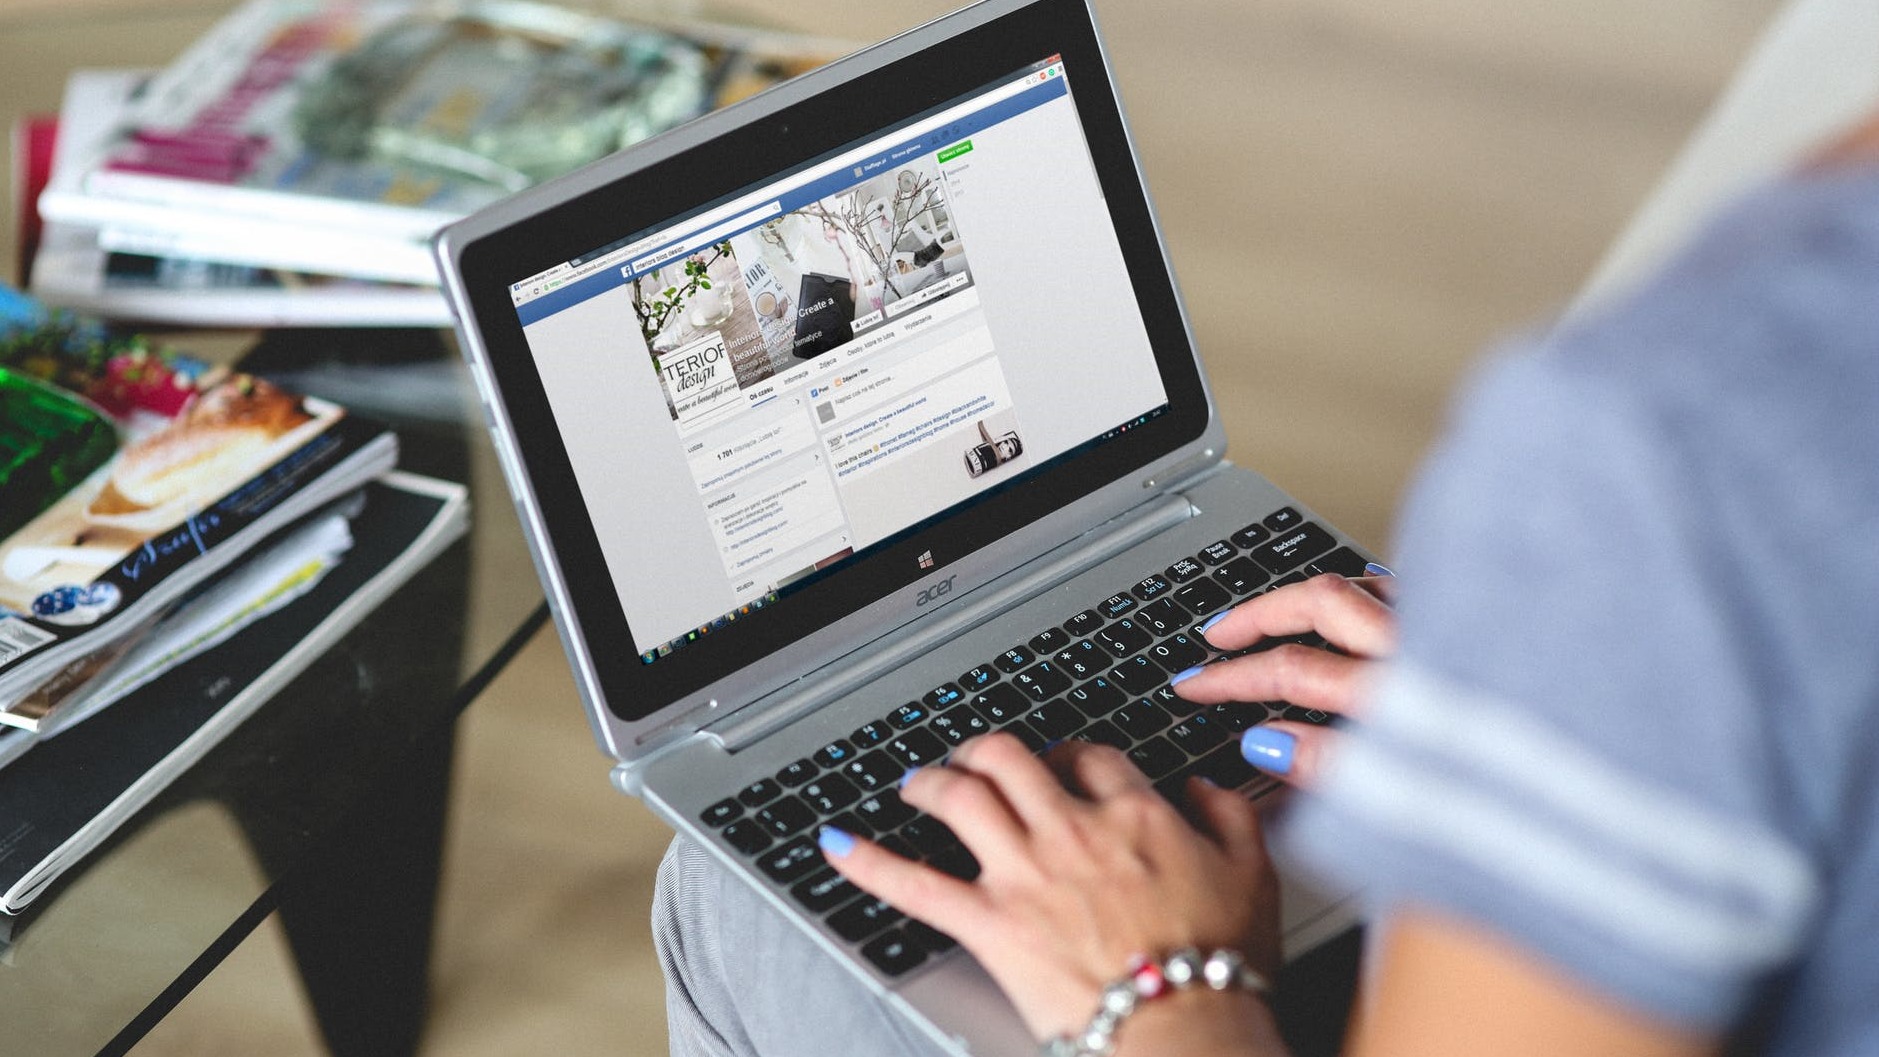 How To Create A Shared ‘Saved’ Collection On Facebook